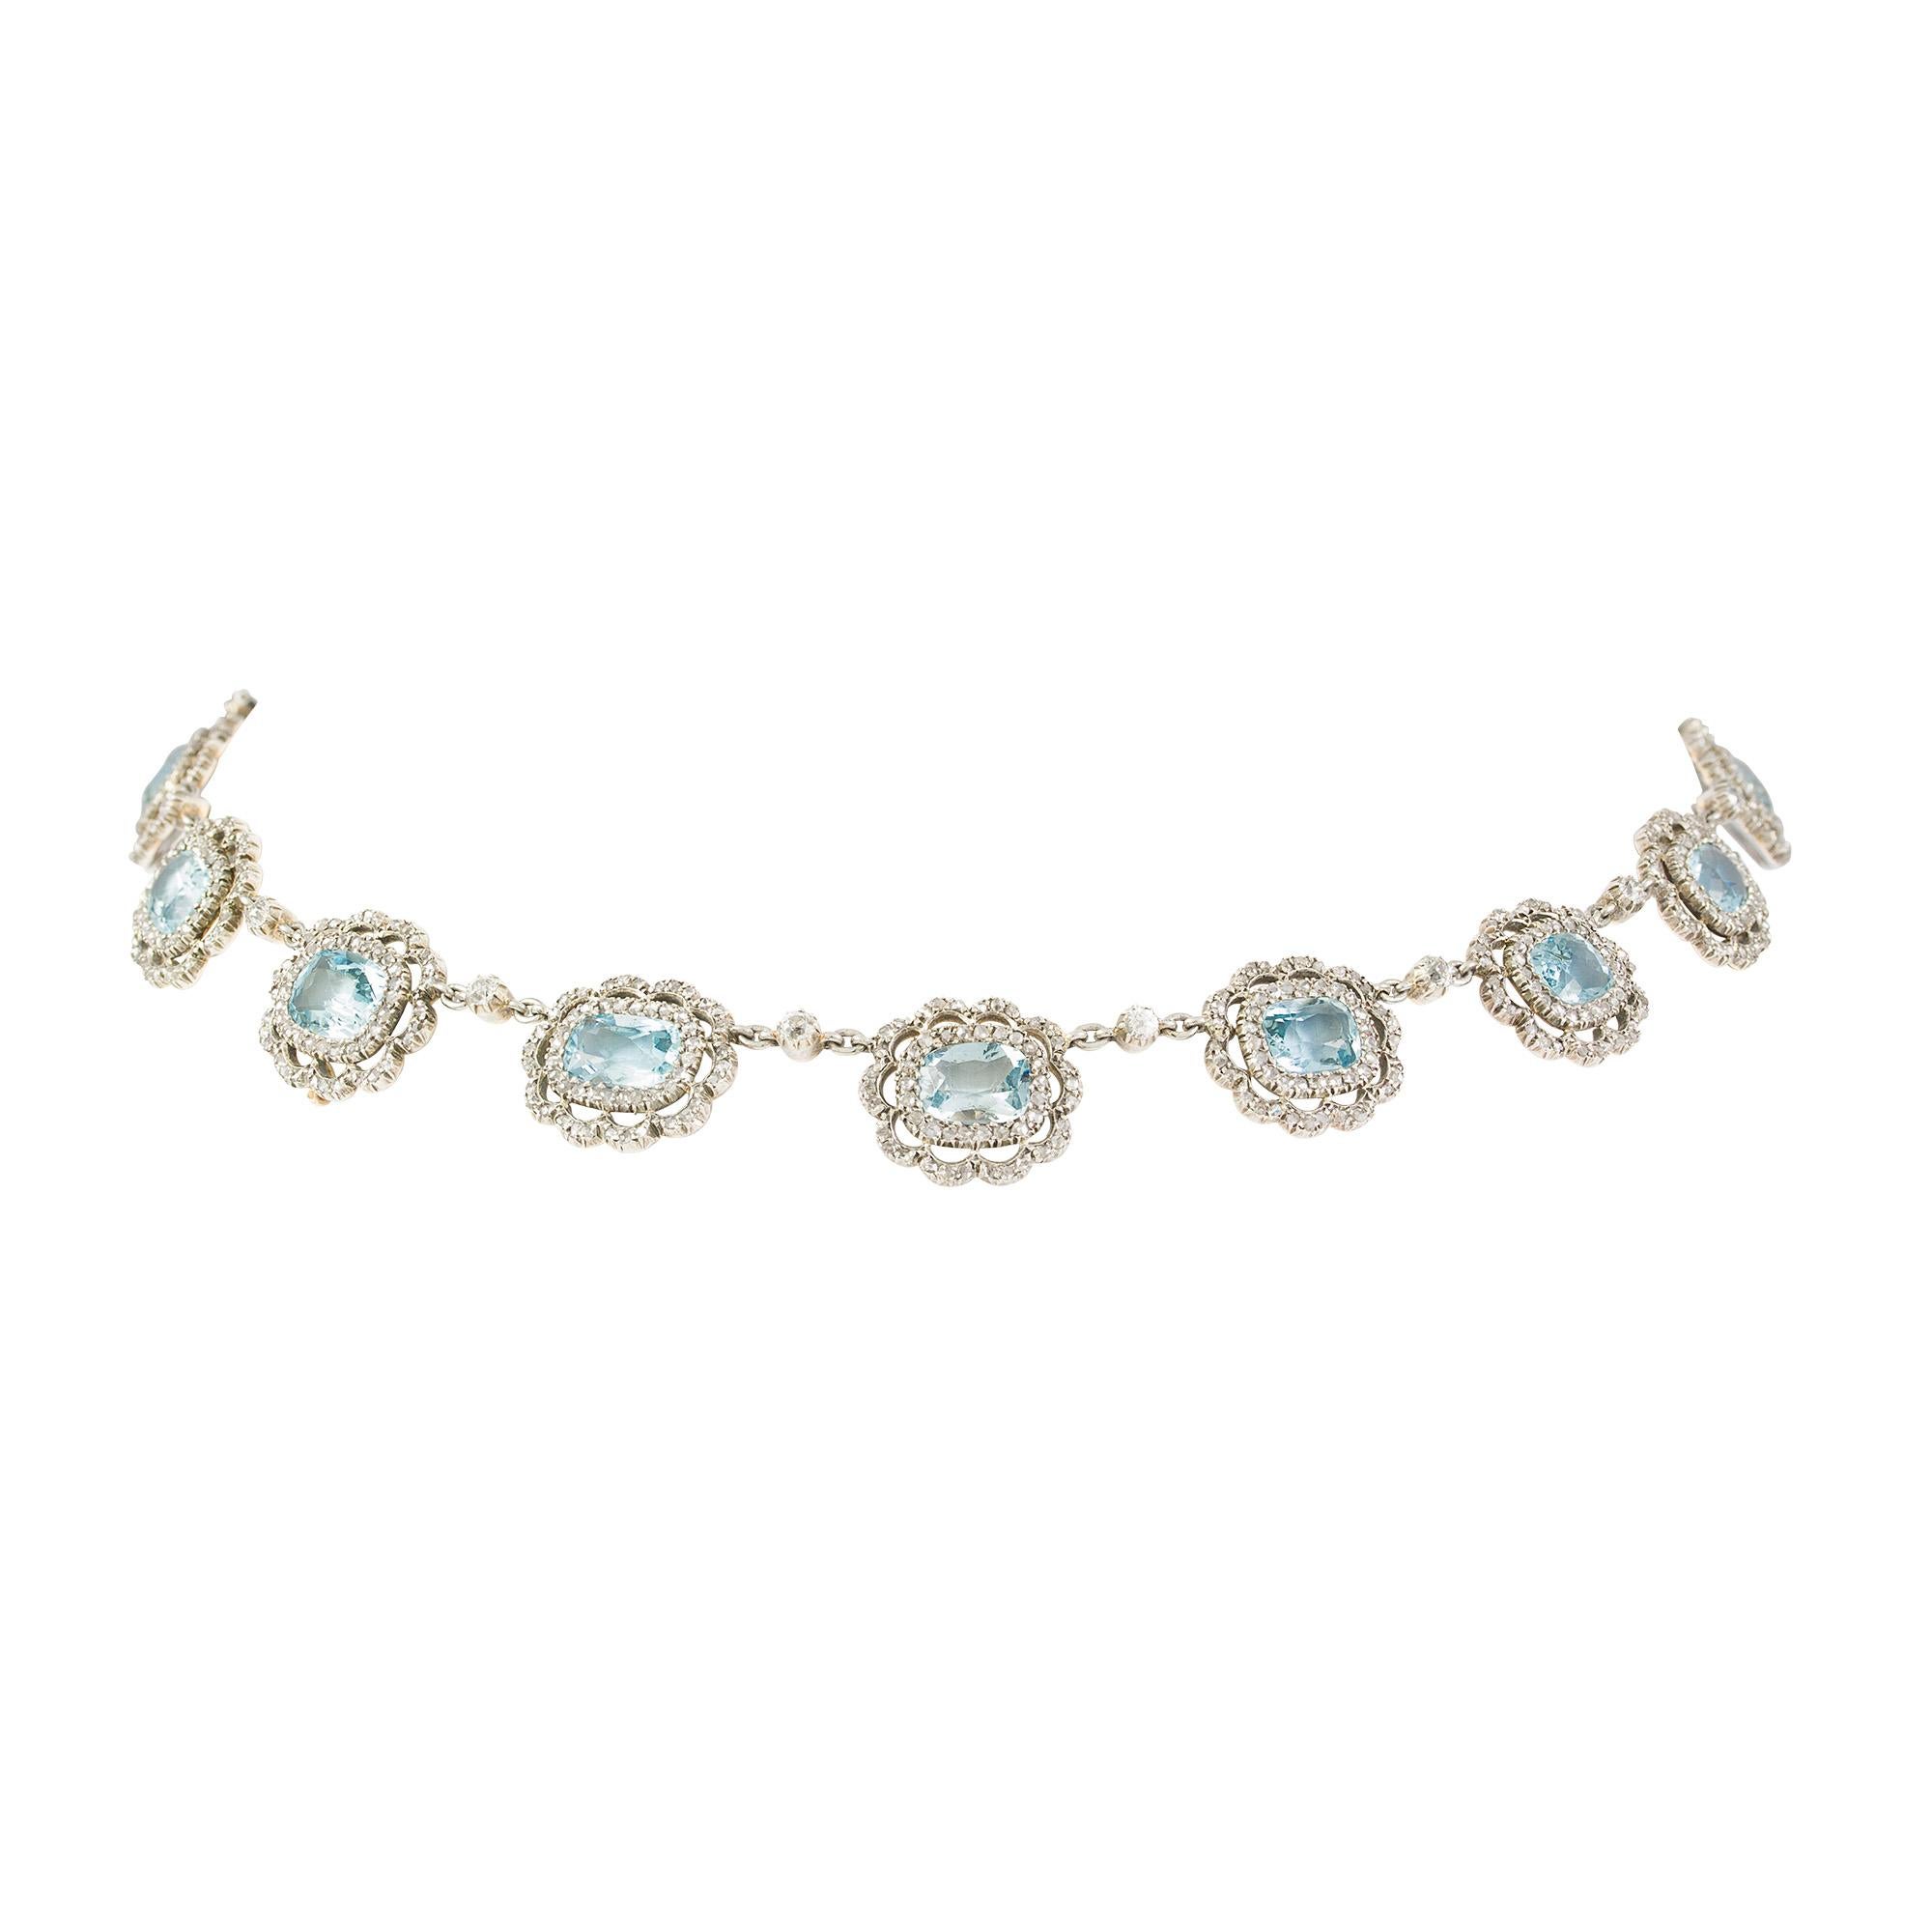 A late Victorian aquamarine and diamond cluster necklace, the sixteen cushion shape aquamarines, estimated to weigh a total of 26 carats, surrounded by a double cluster of rose-cut diamonds with old brilliant-cut diamonds inbetween, all to a cut